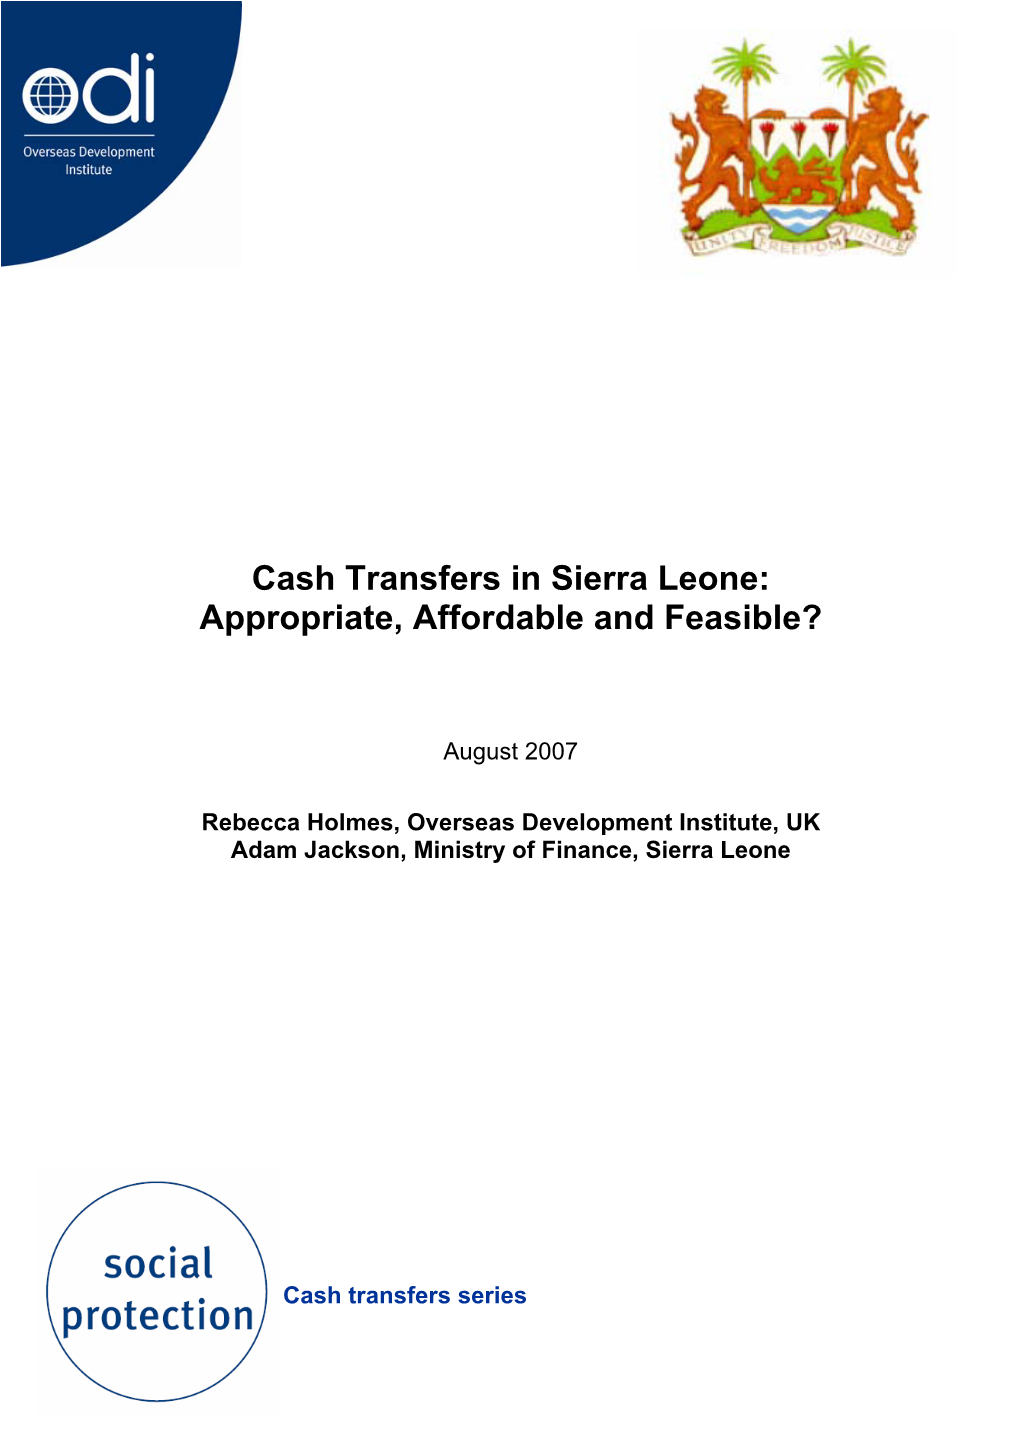 Cash Transfers in Sierra Leone: Appropriate, Affordable and Feasible?